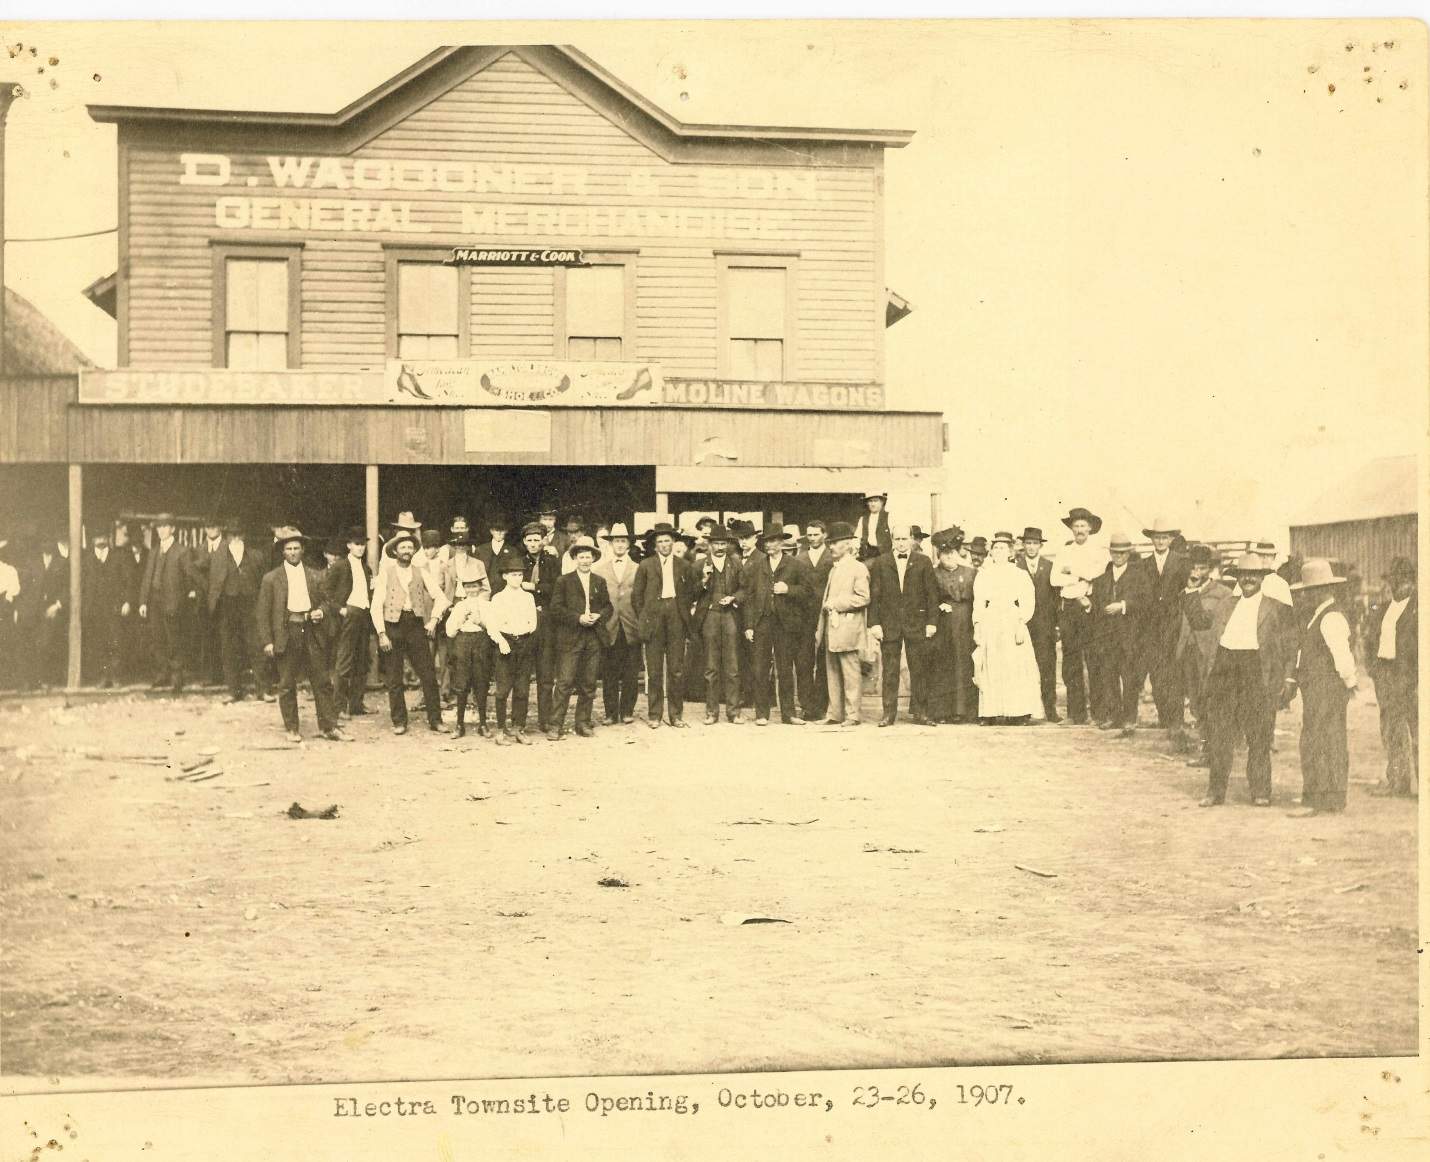 Photo of the Electra Town Site Opening in 1907